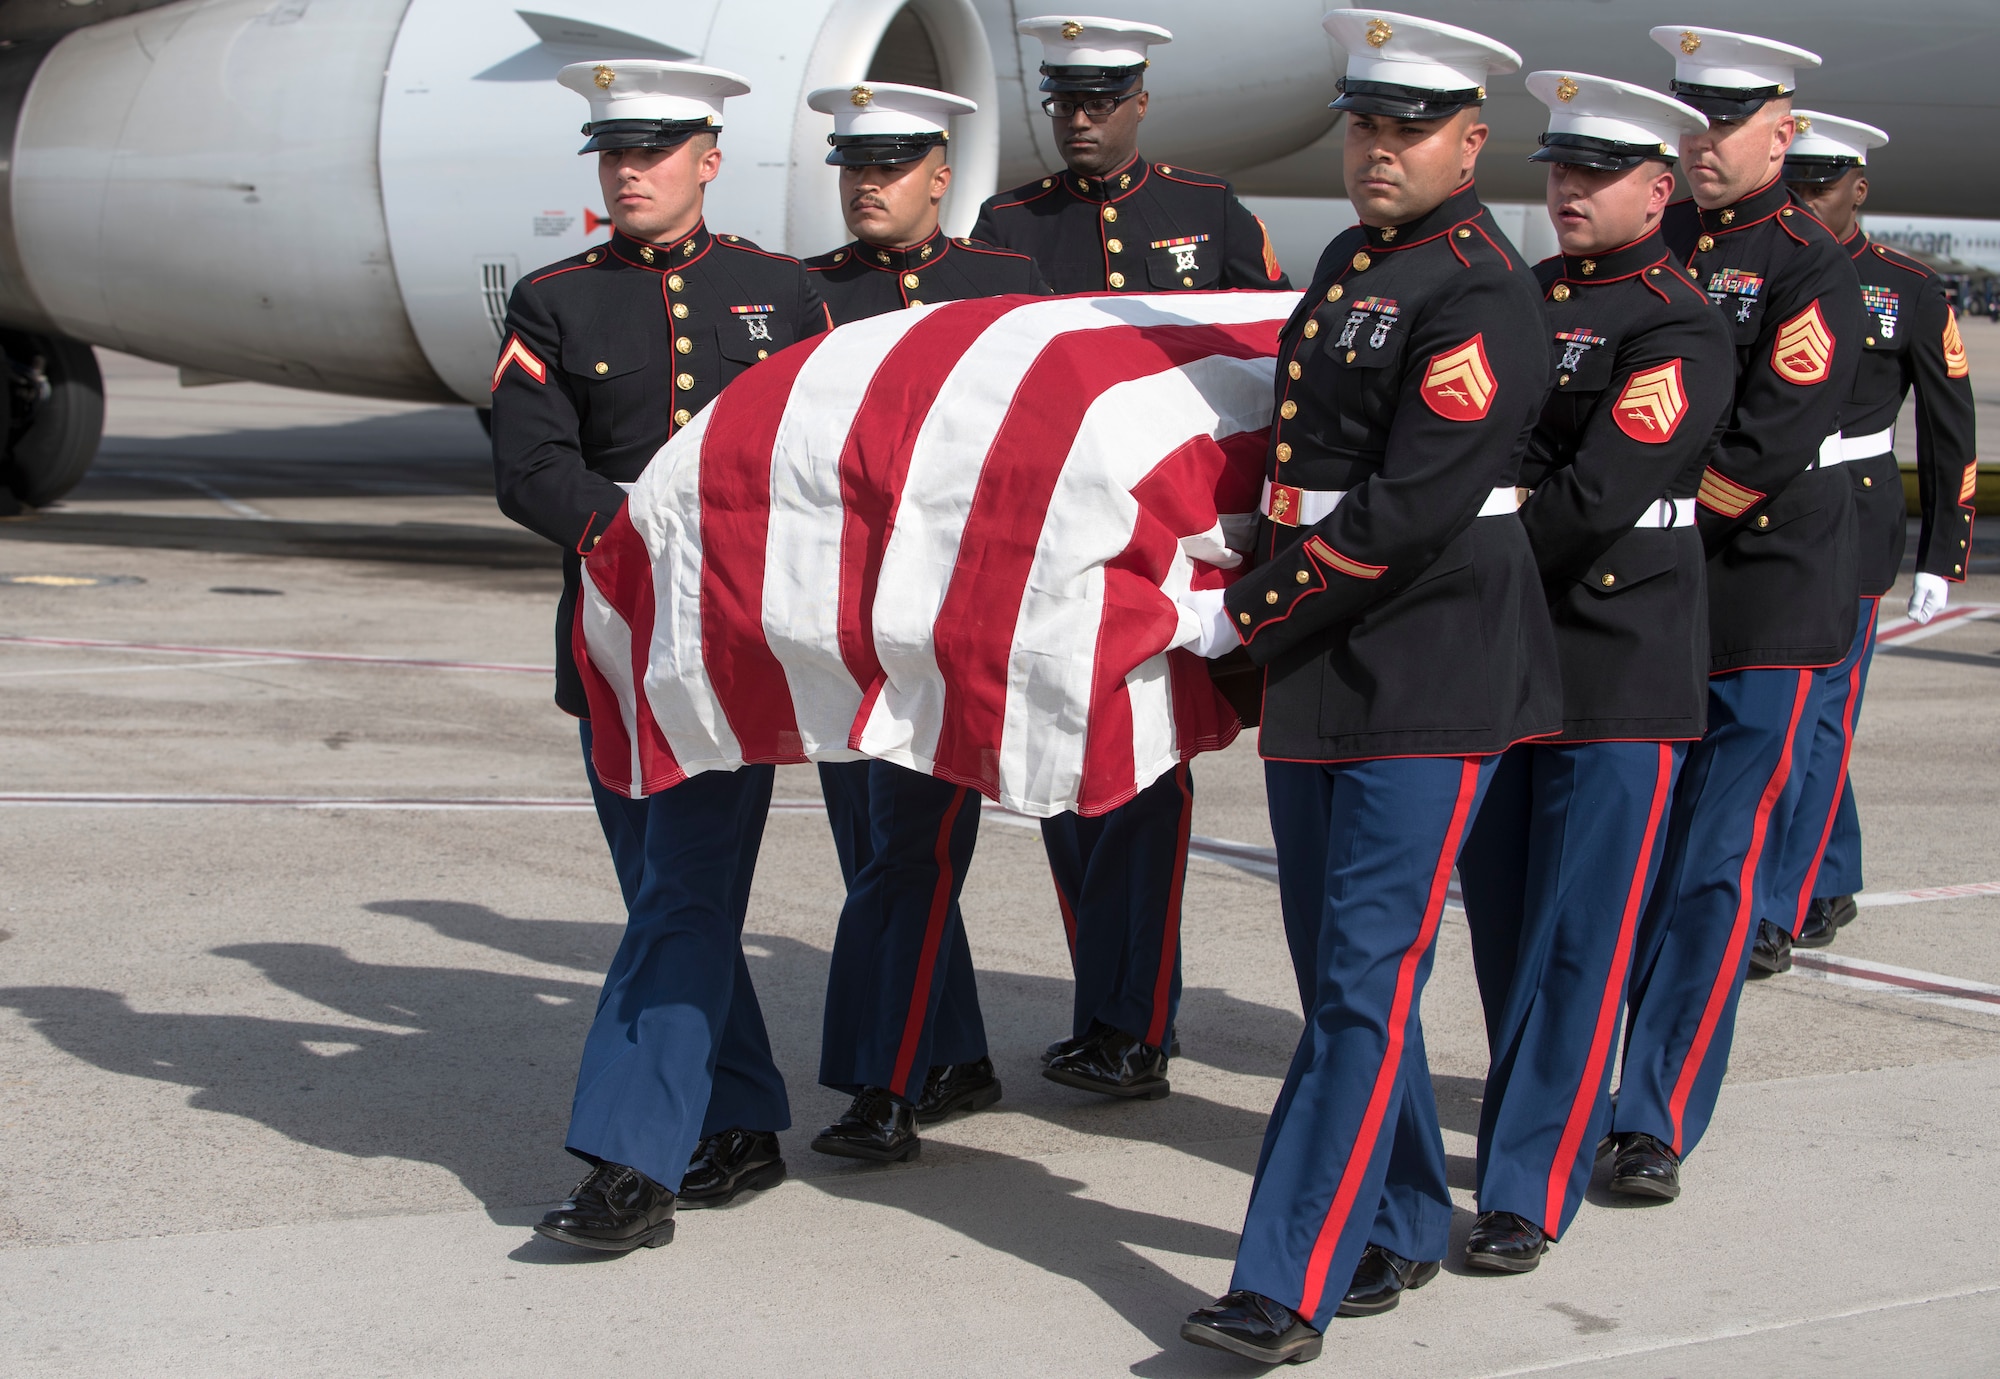 Marines assigned to the 6th Engineer Support Battalion, Bulk Fuel Company Charlie, Site Support Phoenix, carry a fallen Marine in a flag-draped transfer case during a dignified transfer May 17, 2019, at the Phoenix Sky Harbor International Airport, Ariz.